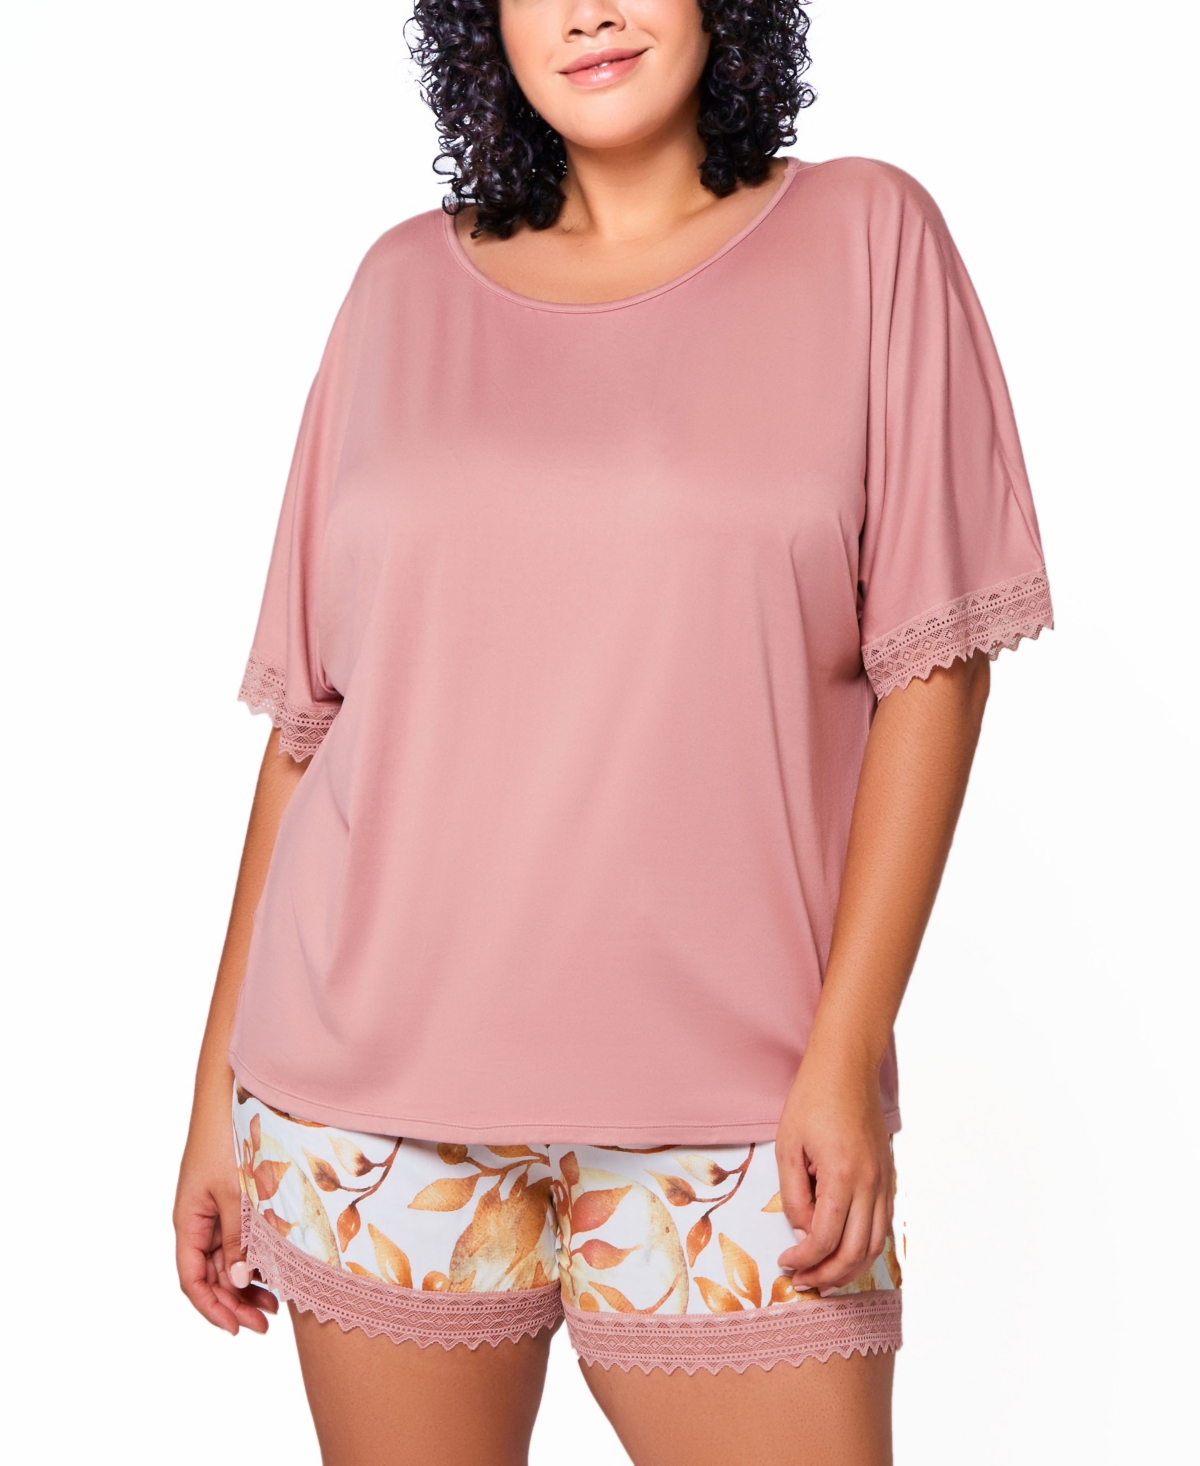 Plus Size 2Pc. Soft Pajama Set Trimmed in Lace - Rose